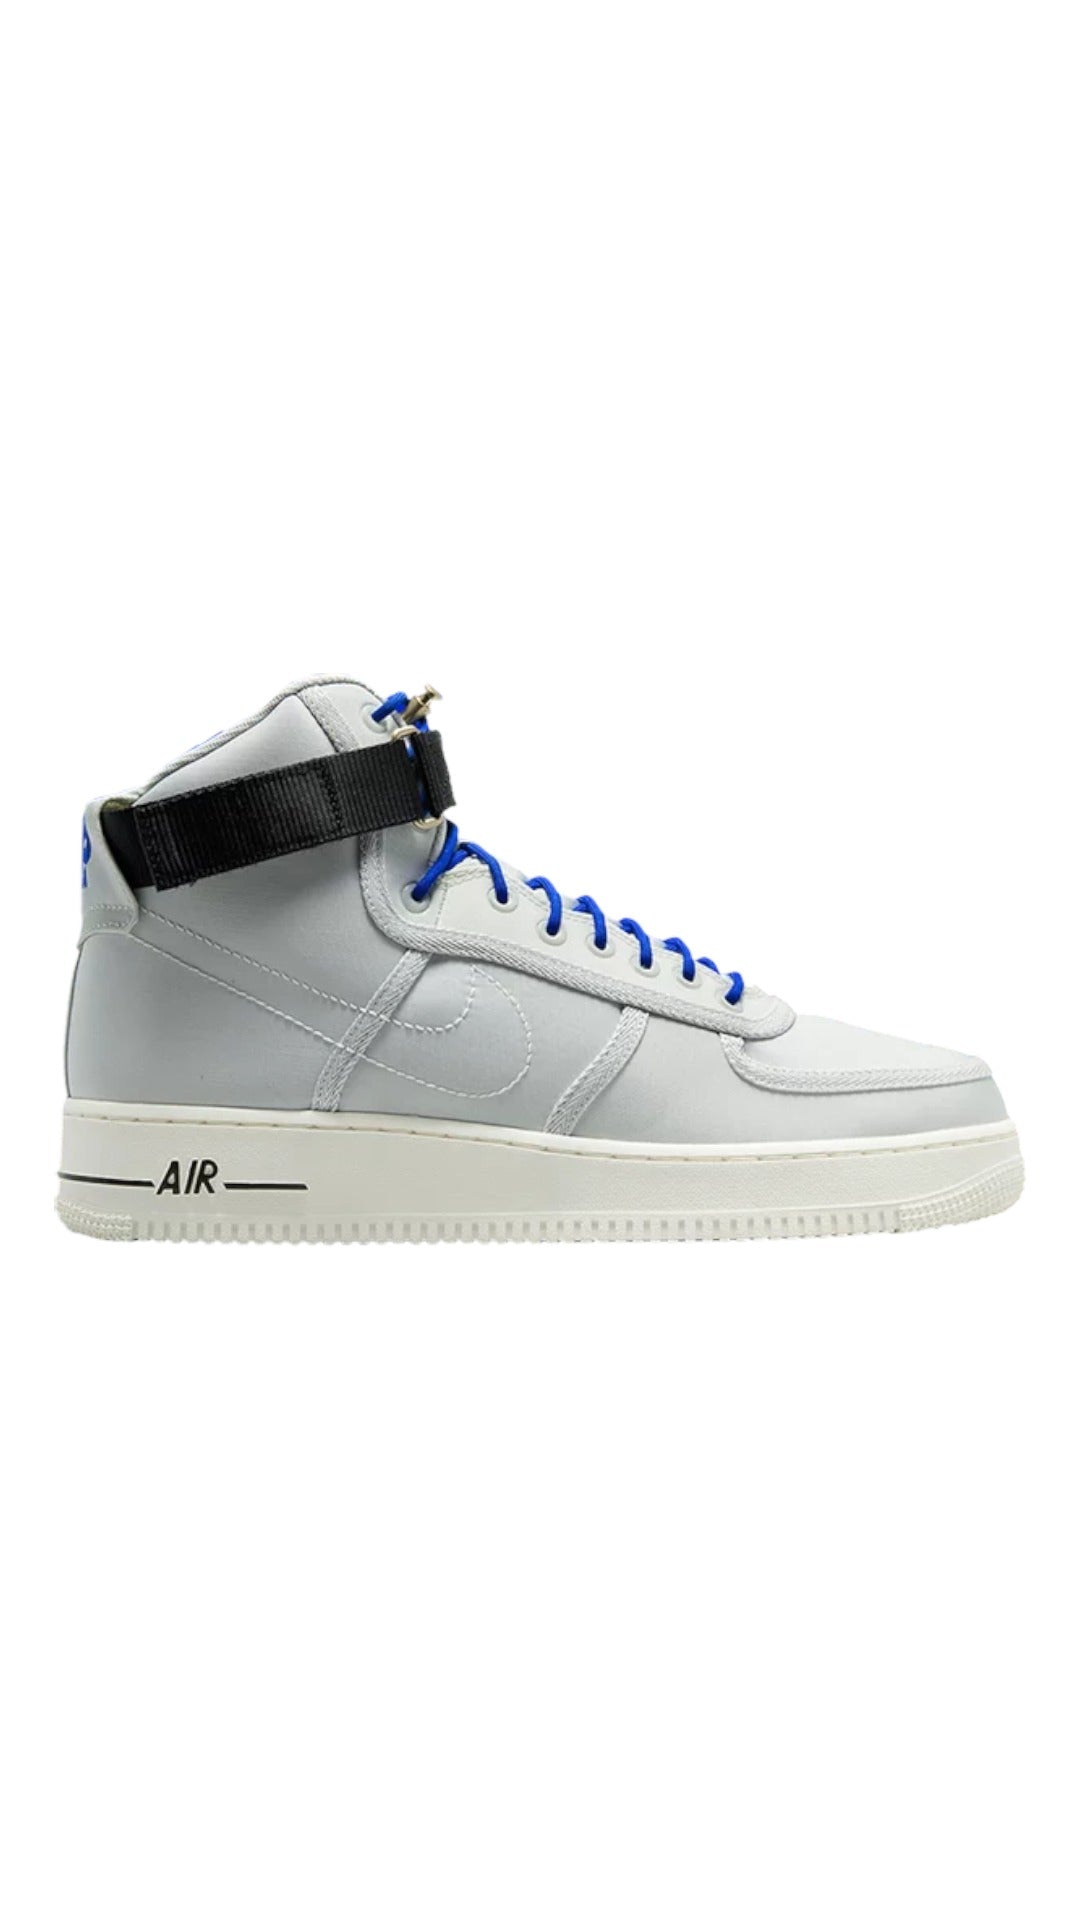 Nike Air Force 1 High '07 LV8 'Moving Company - Photon Dust'